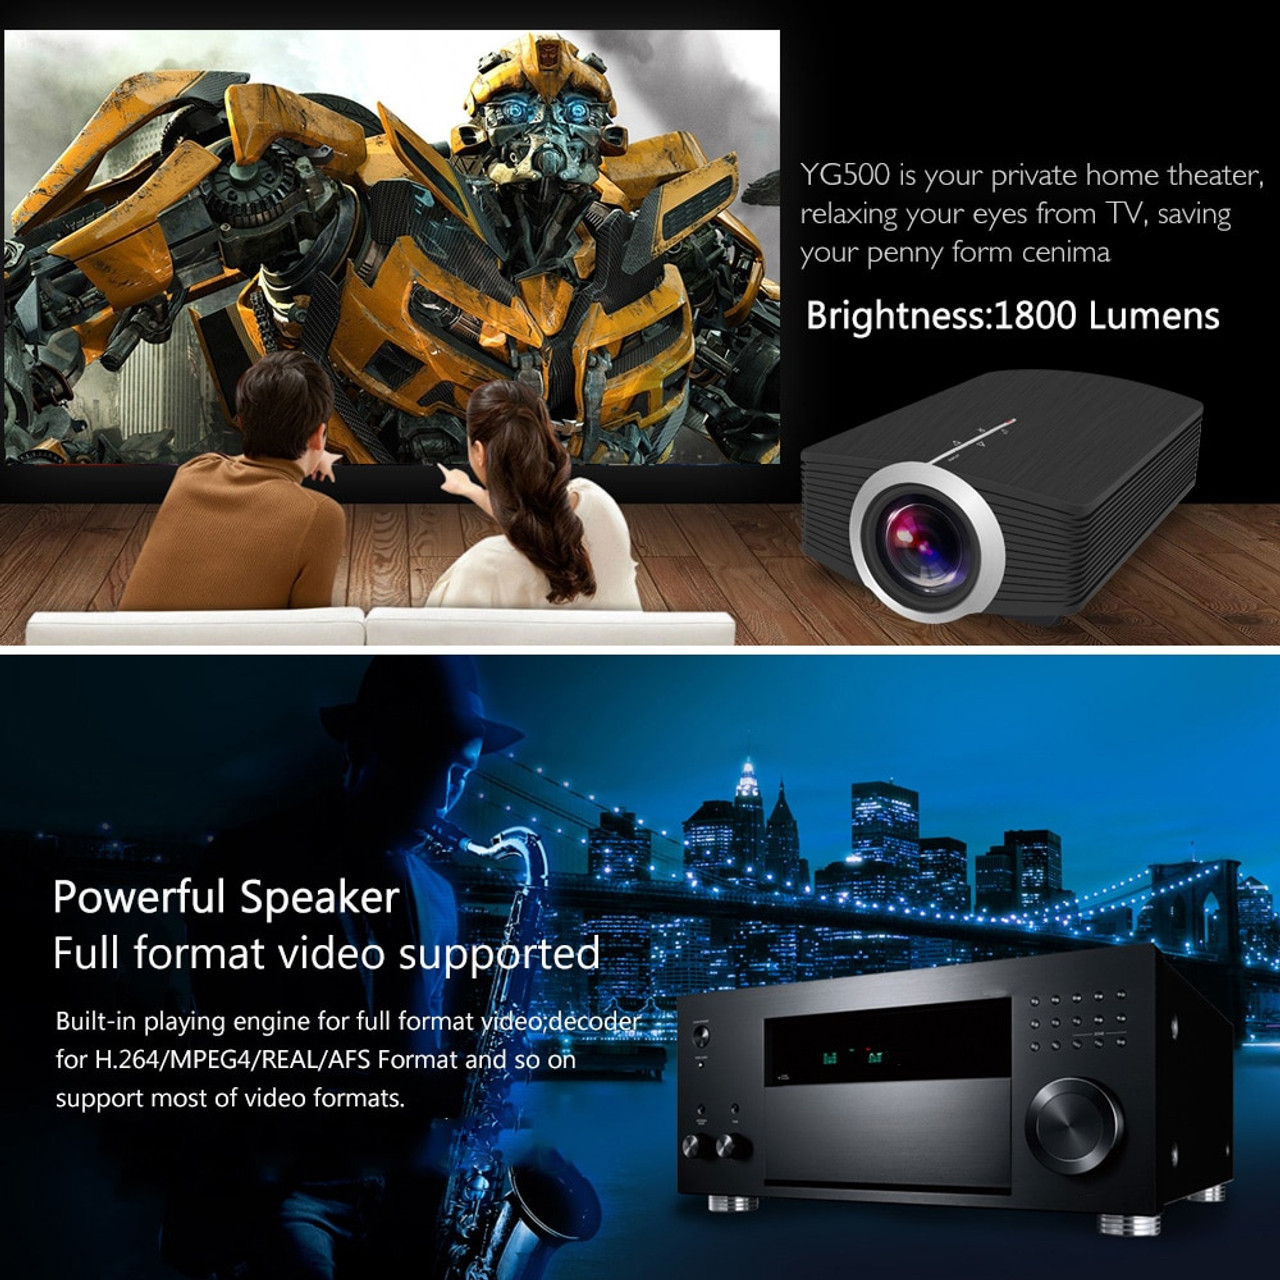 o Yg500 Mini Projector 1800 Lumens Portable 854 480 Lcd Projector Support 1080p Portable Hdmi Home Cinema Led 3d Projector Onshopdeals Com